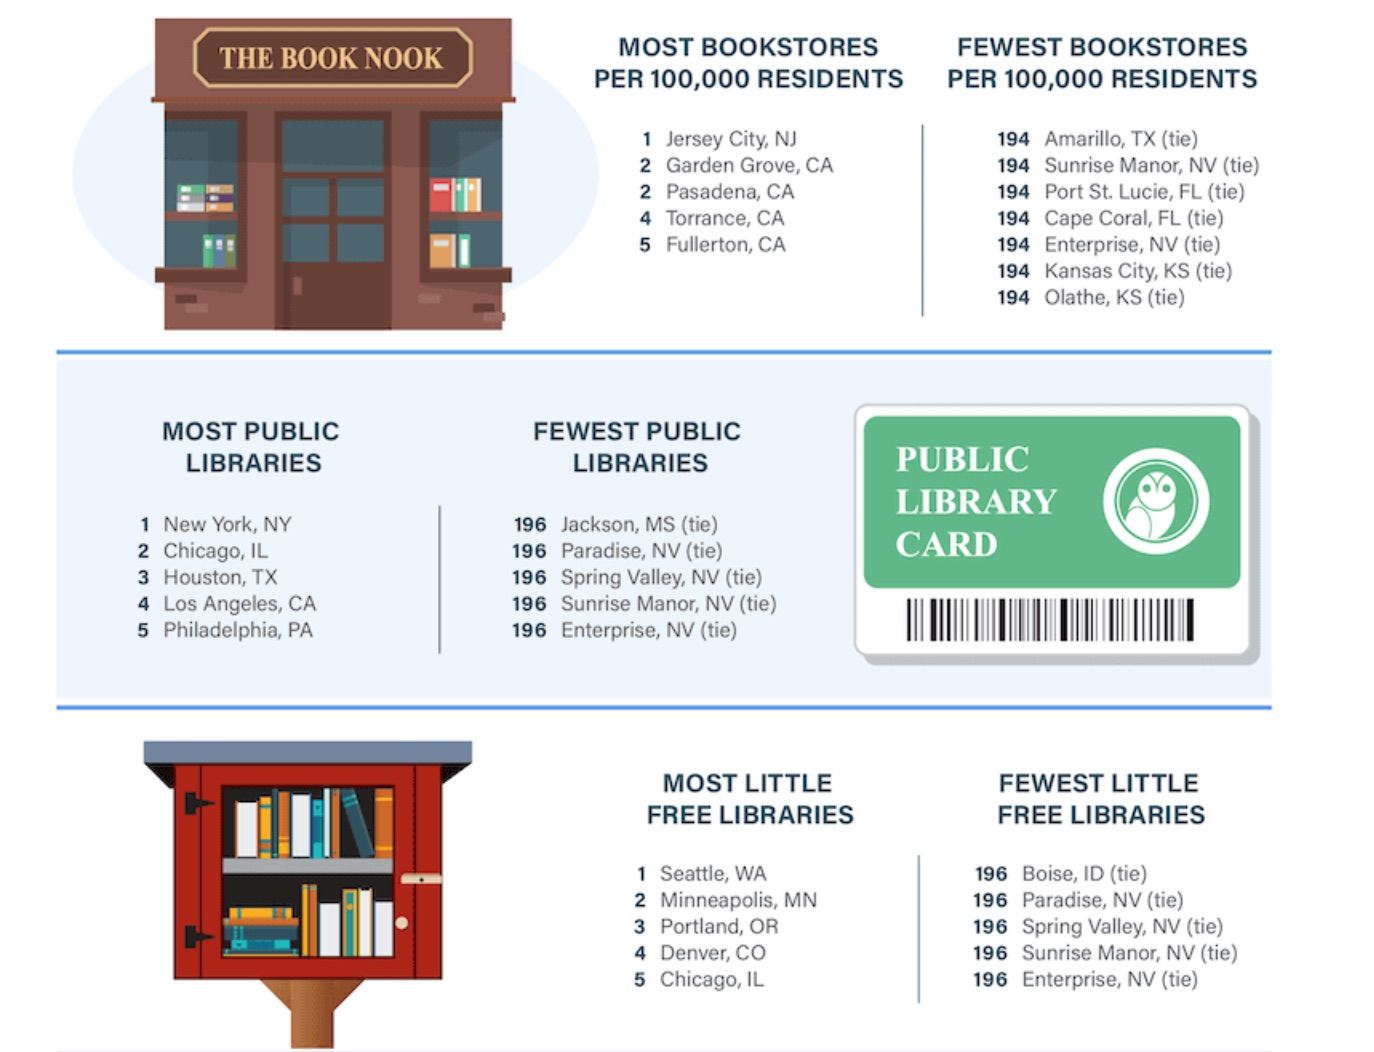 Image of three charts from the study, top to bottom: most and least bookstores, most and least public libraries, and most and least little free libraries. 